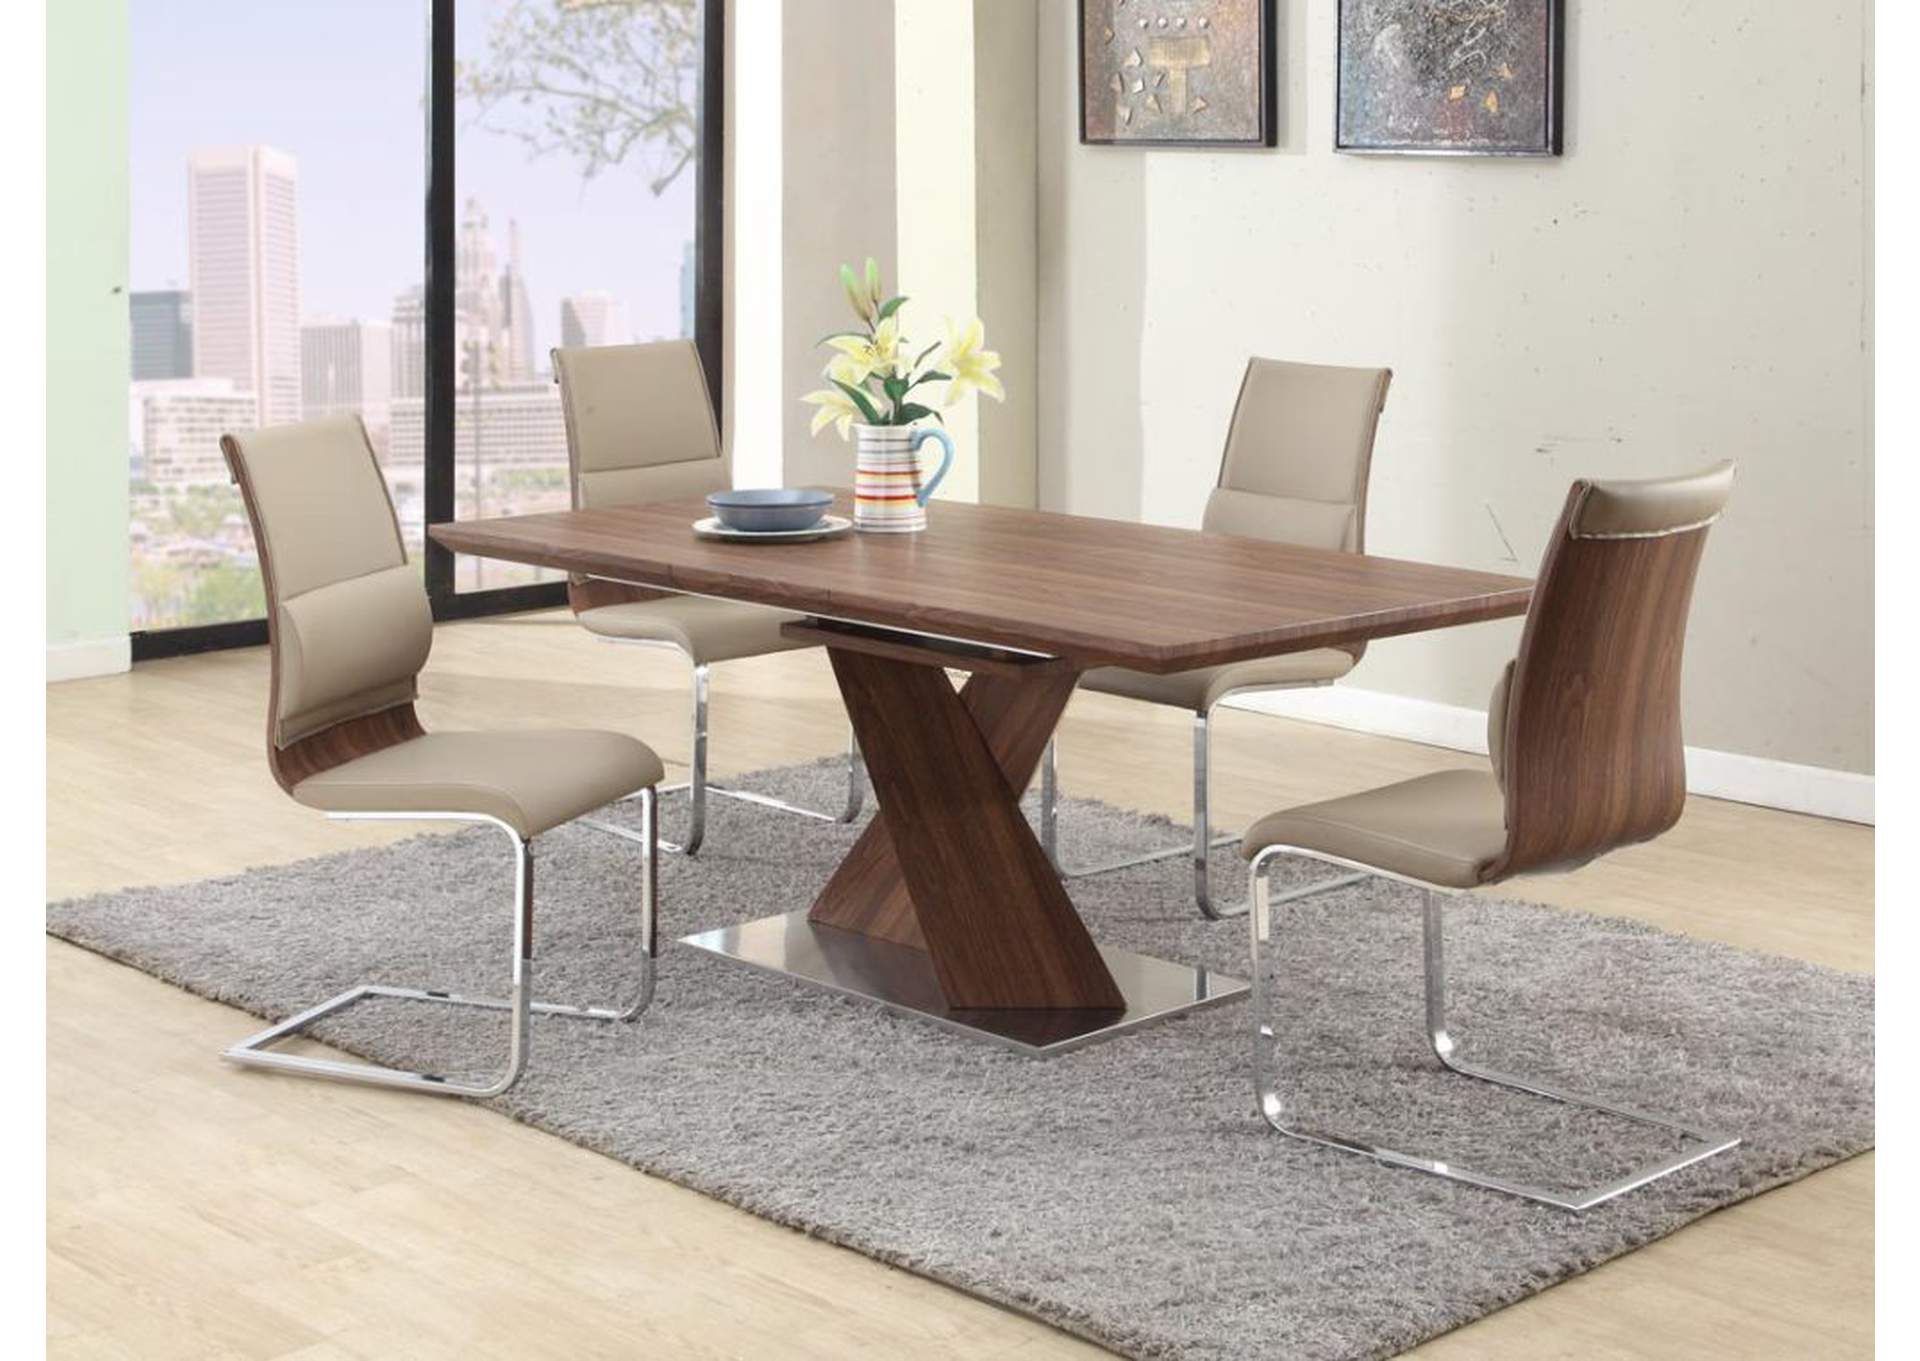 Bethany Modern Dining Set w/ Extendable Table & Chairs,Chintaly Imports